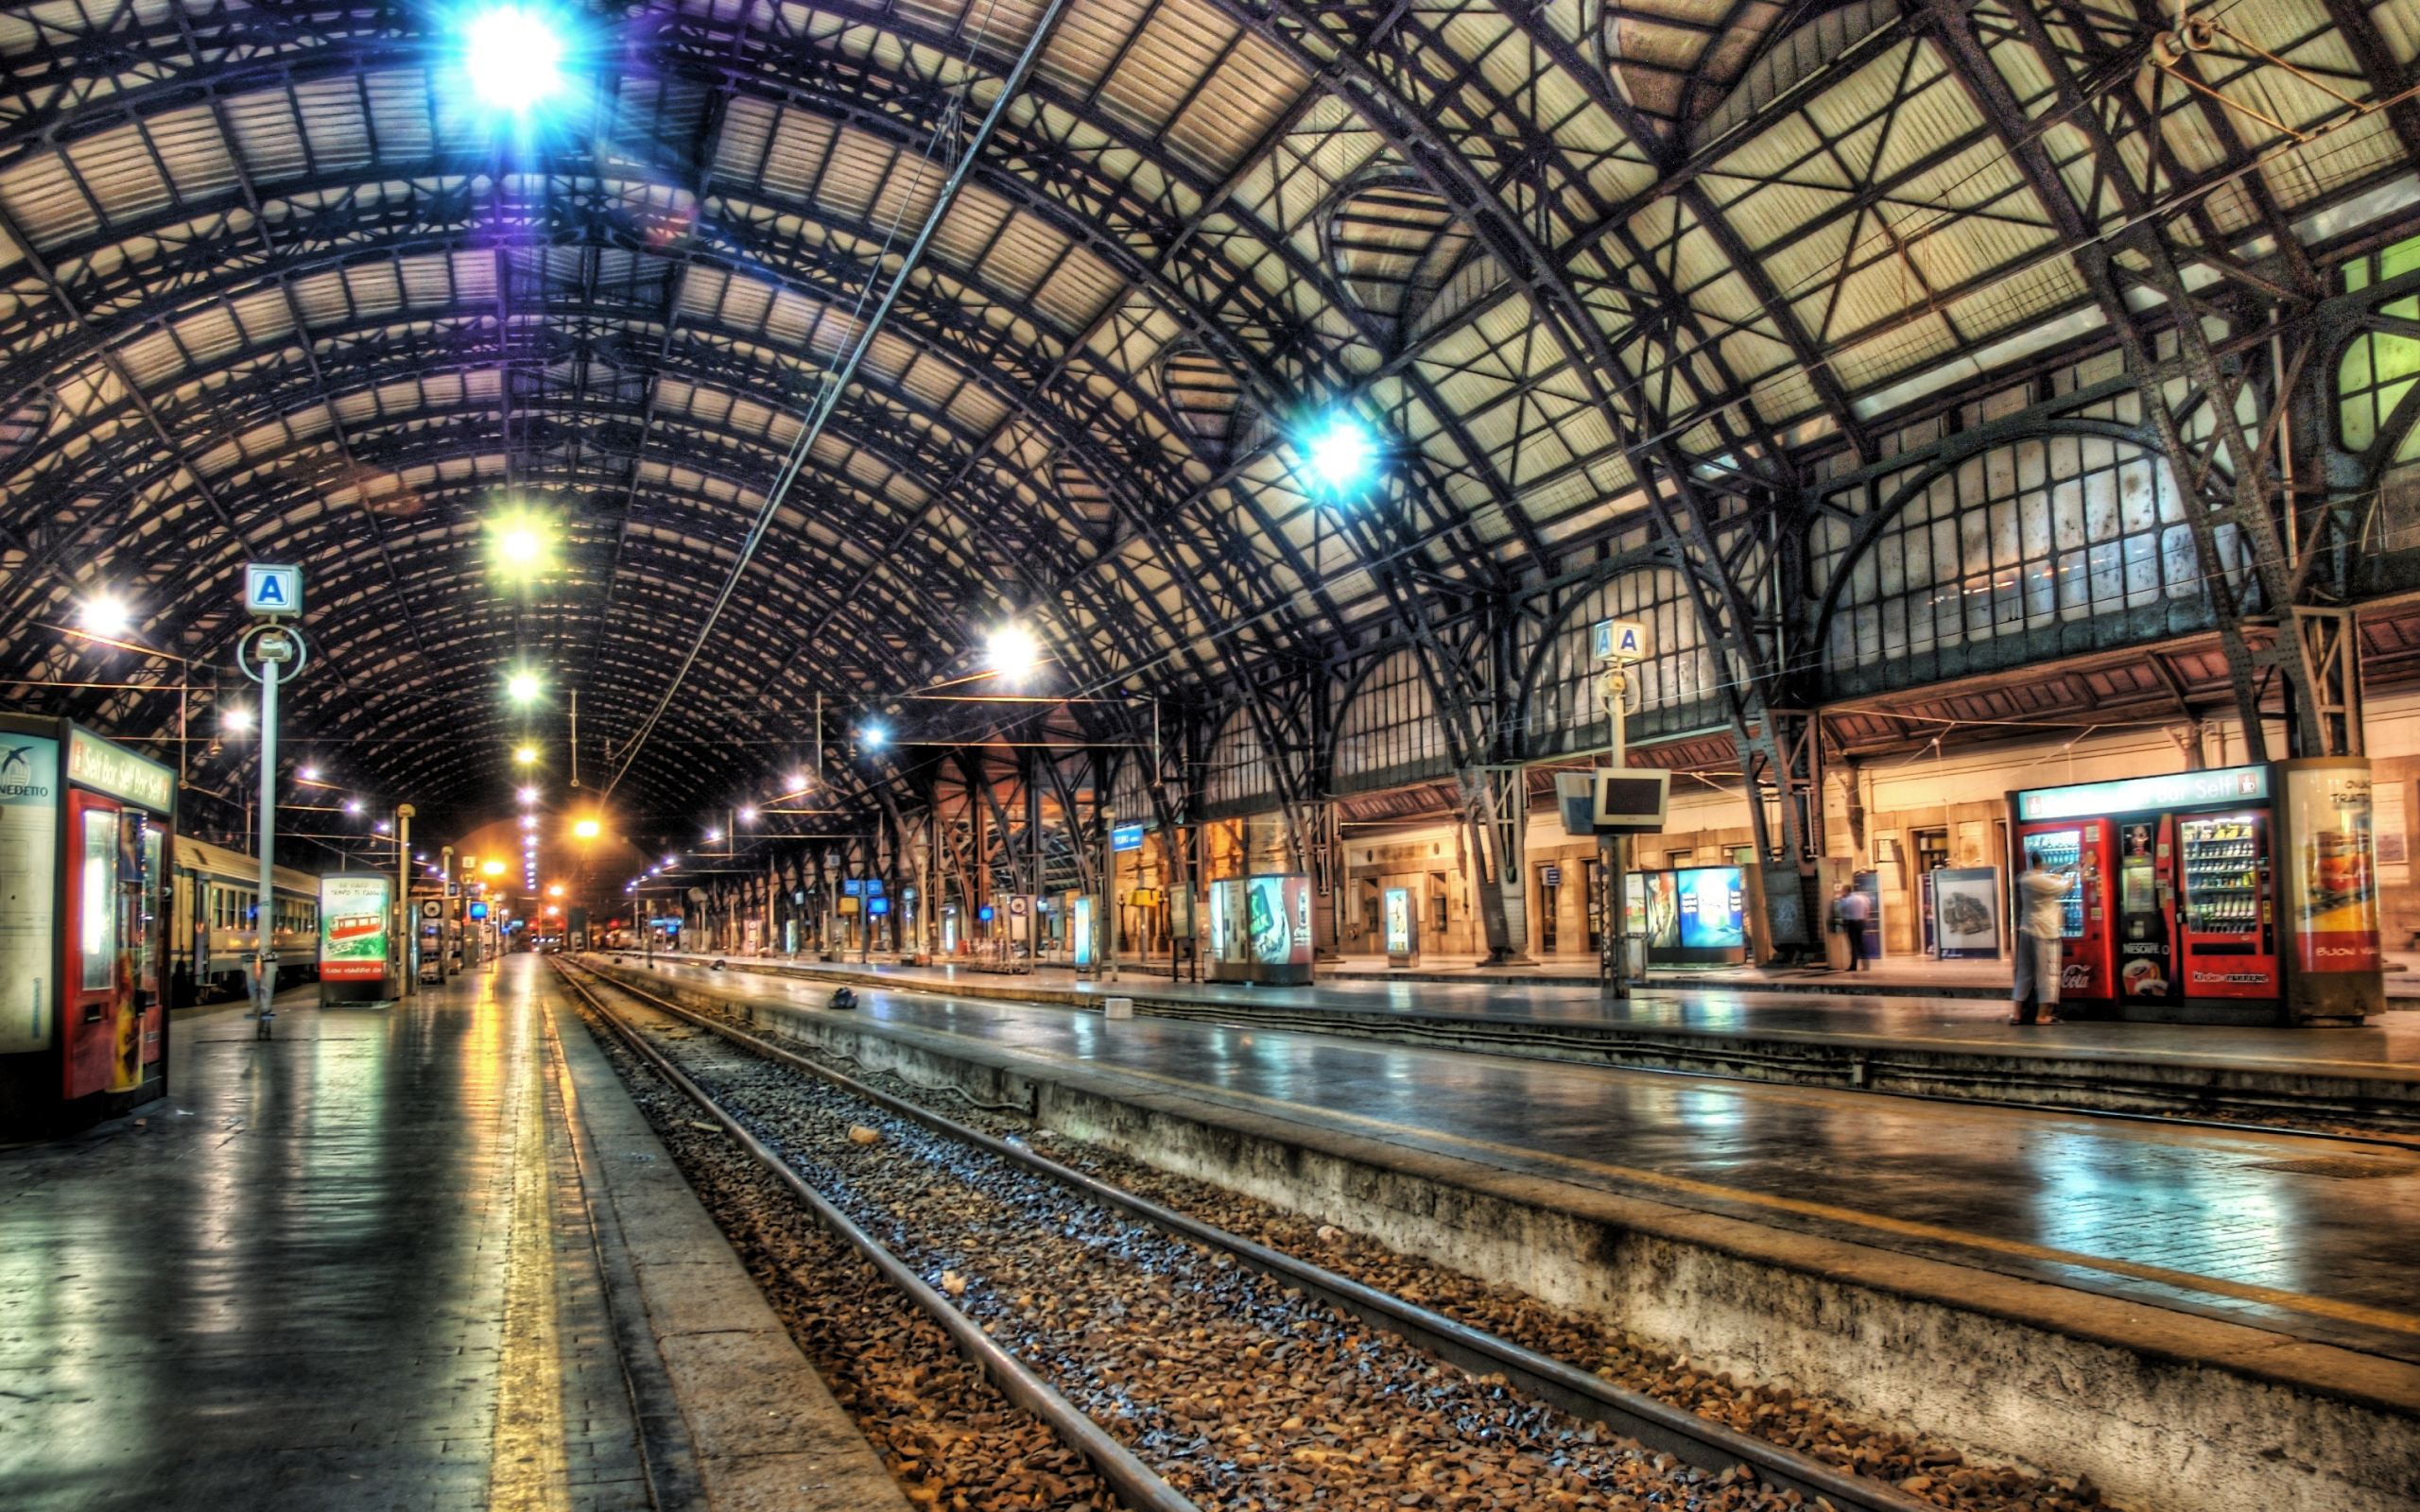 tunnel, man made, train station, building, hdr, railroad, subway